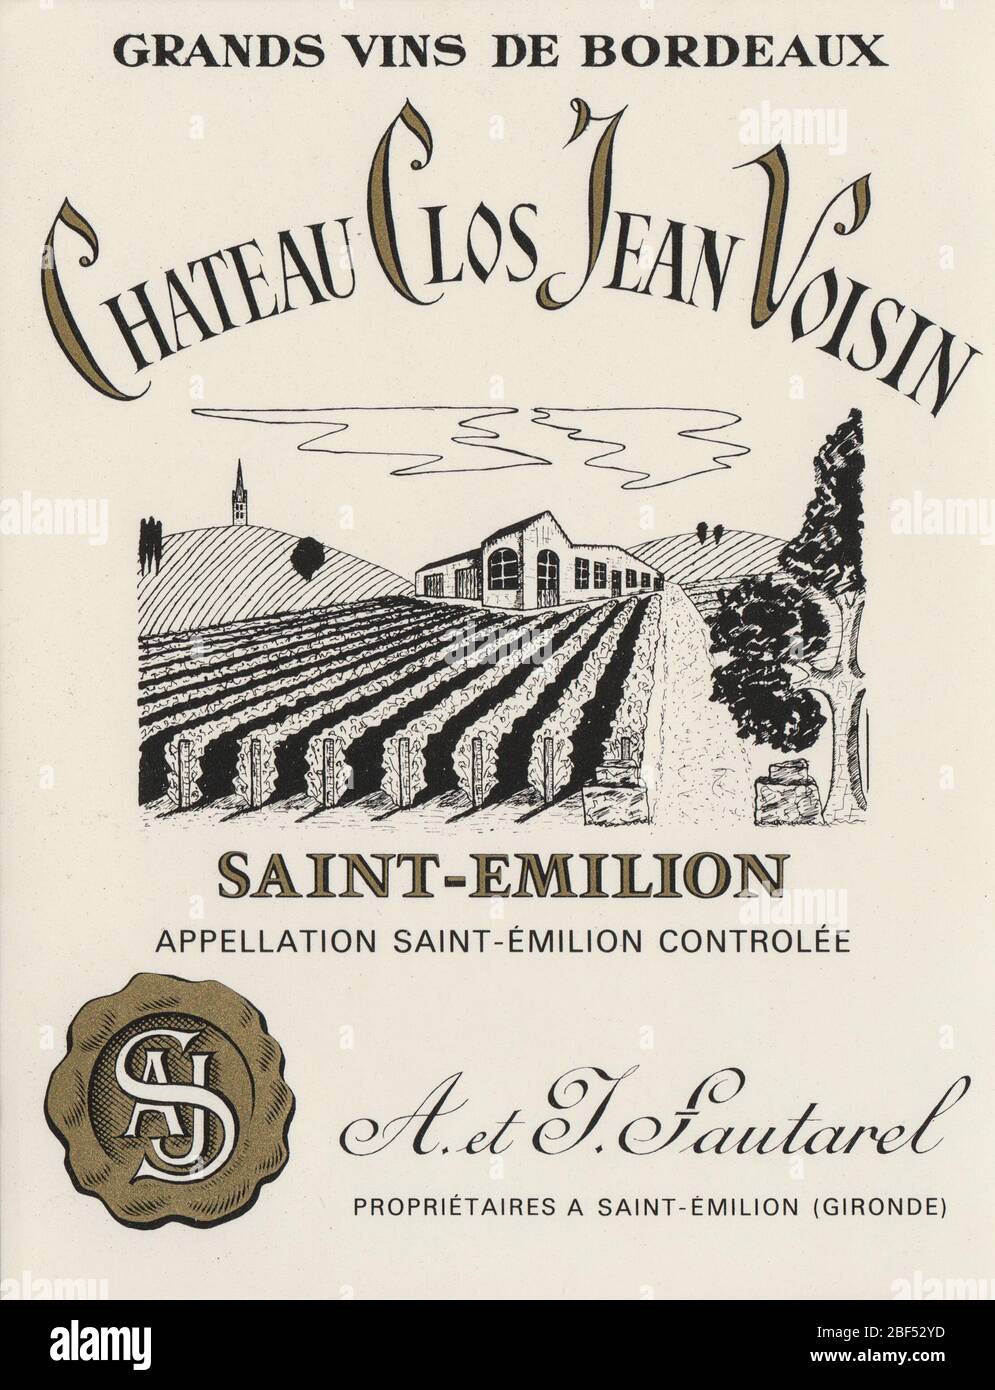 Unused vintage wine label from a Château Clos Jean Voisin Saint Emilion wine, with a drawing of vineyards Stock Photo